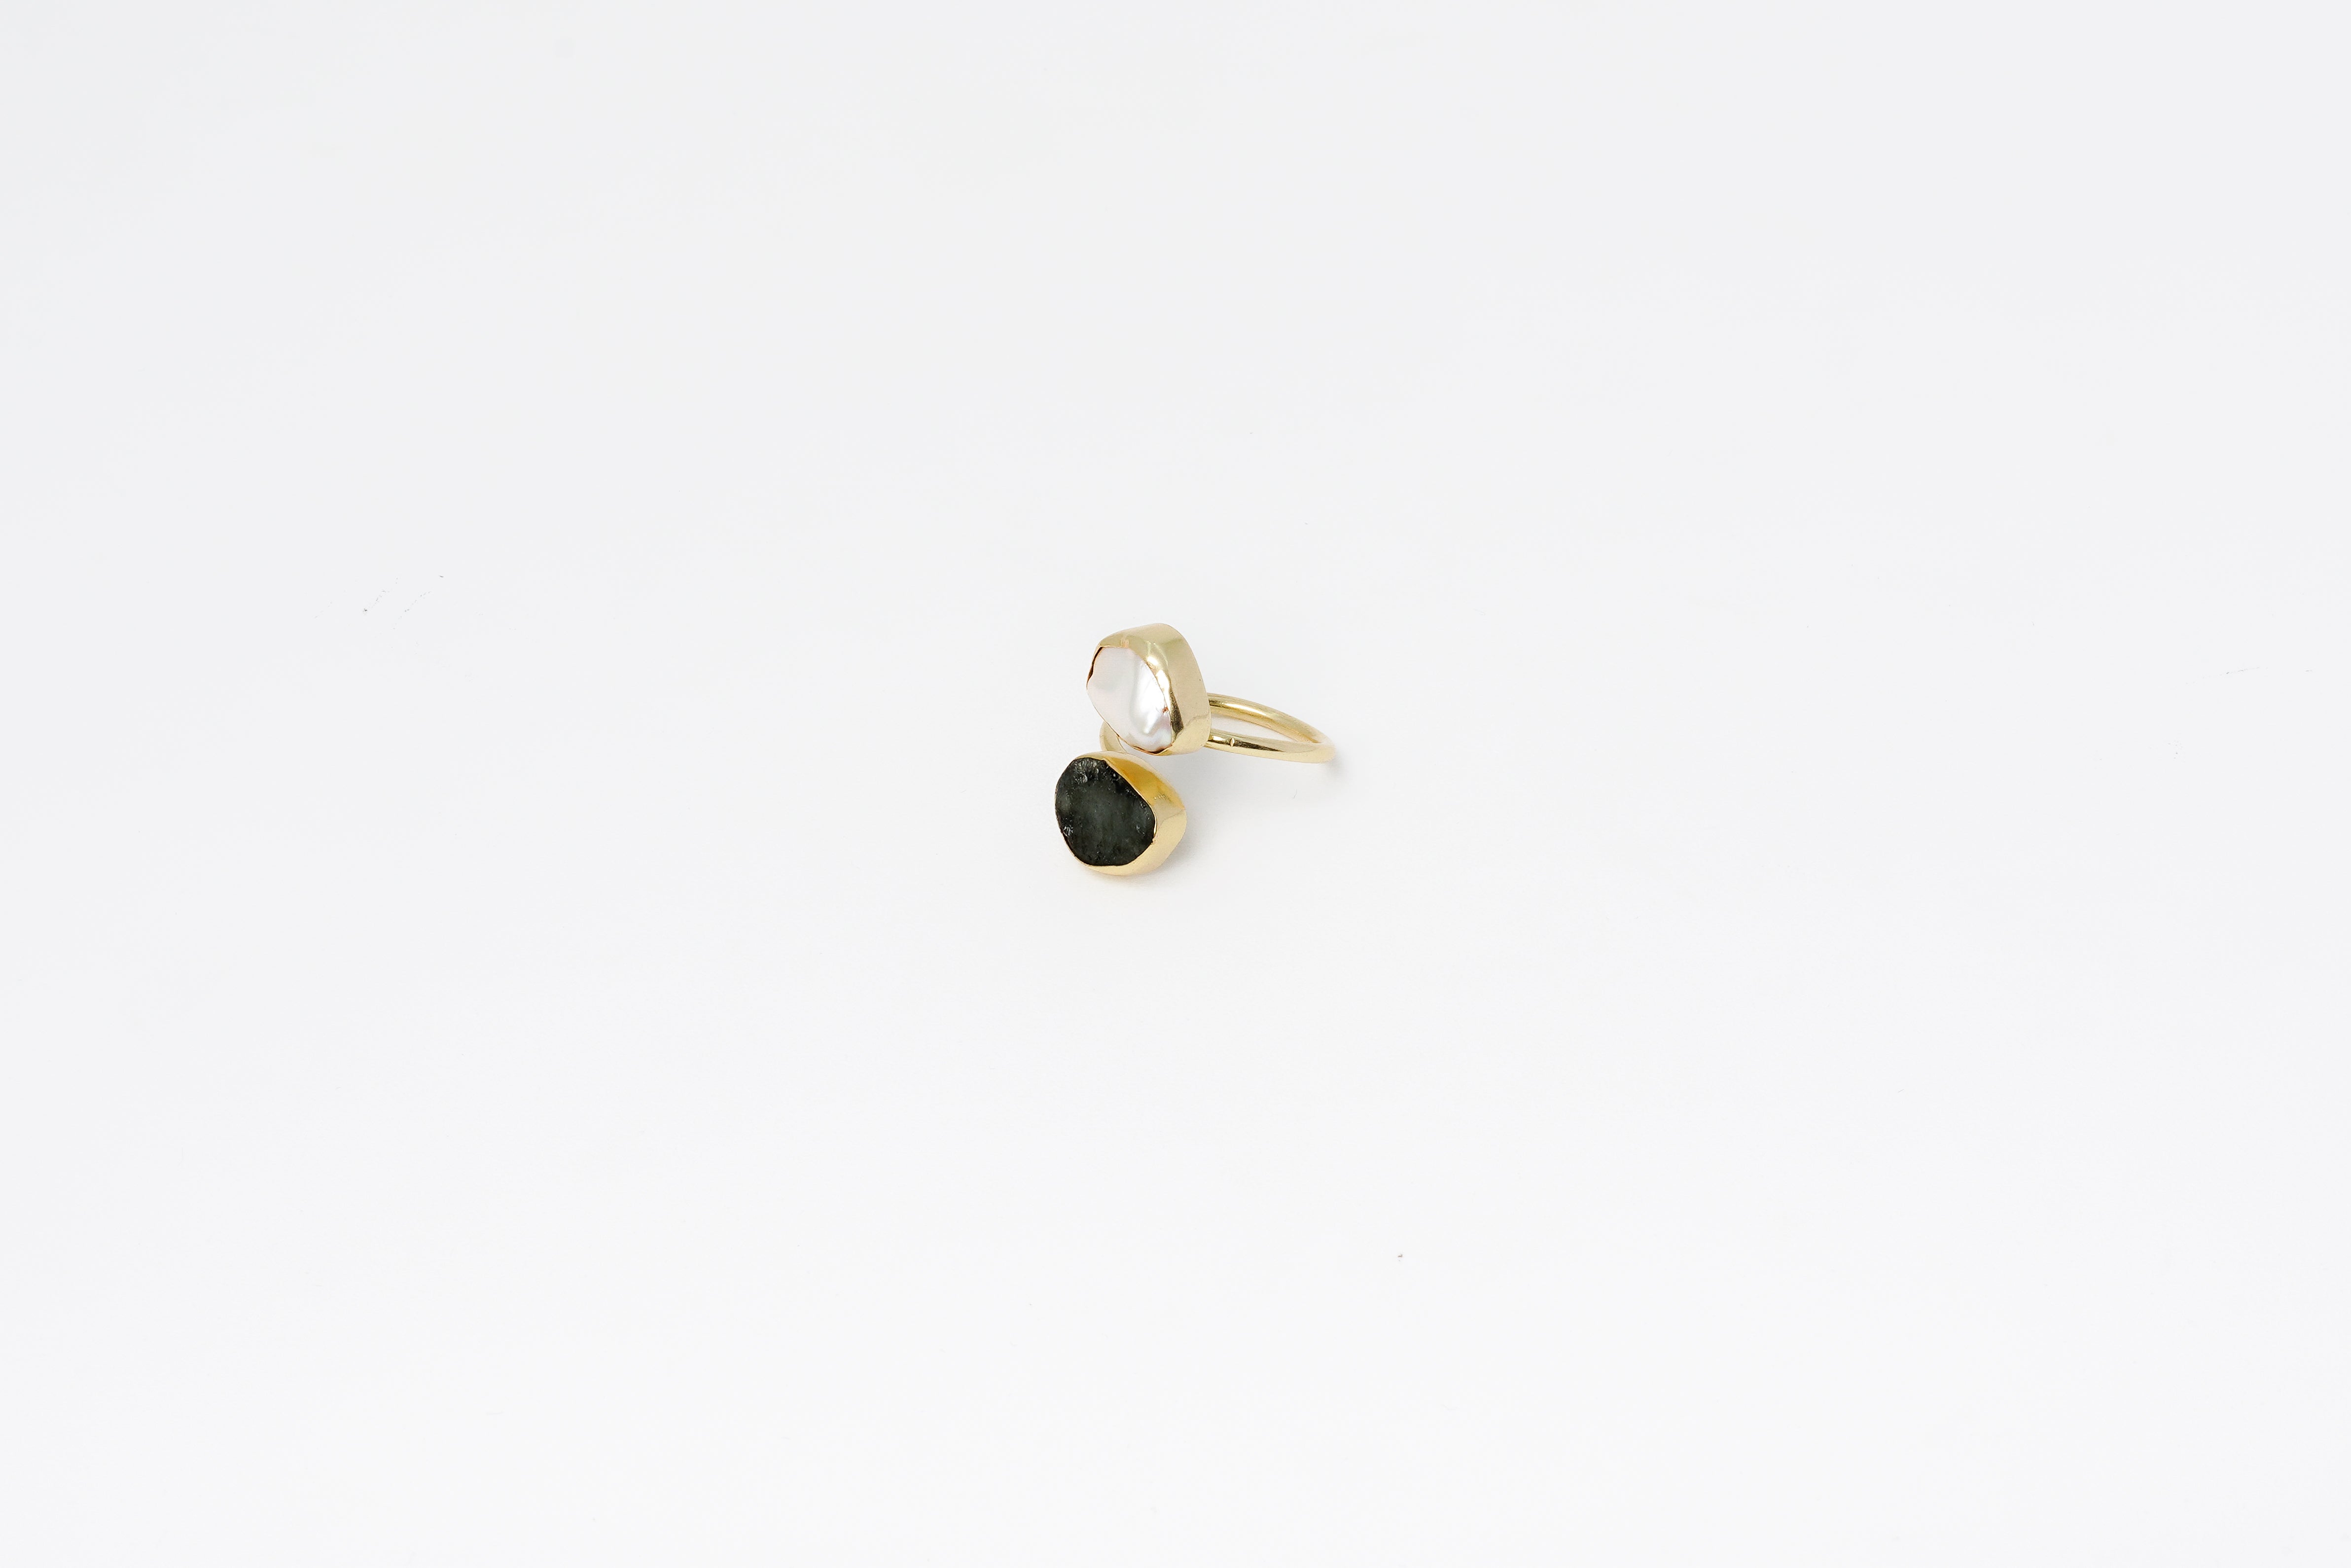 Gold Plated Rough Green Crystal With White Twin Semi precious Stone Adjustable Ring 